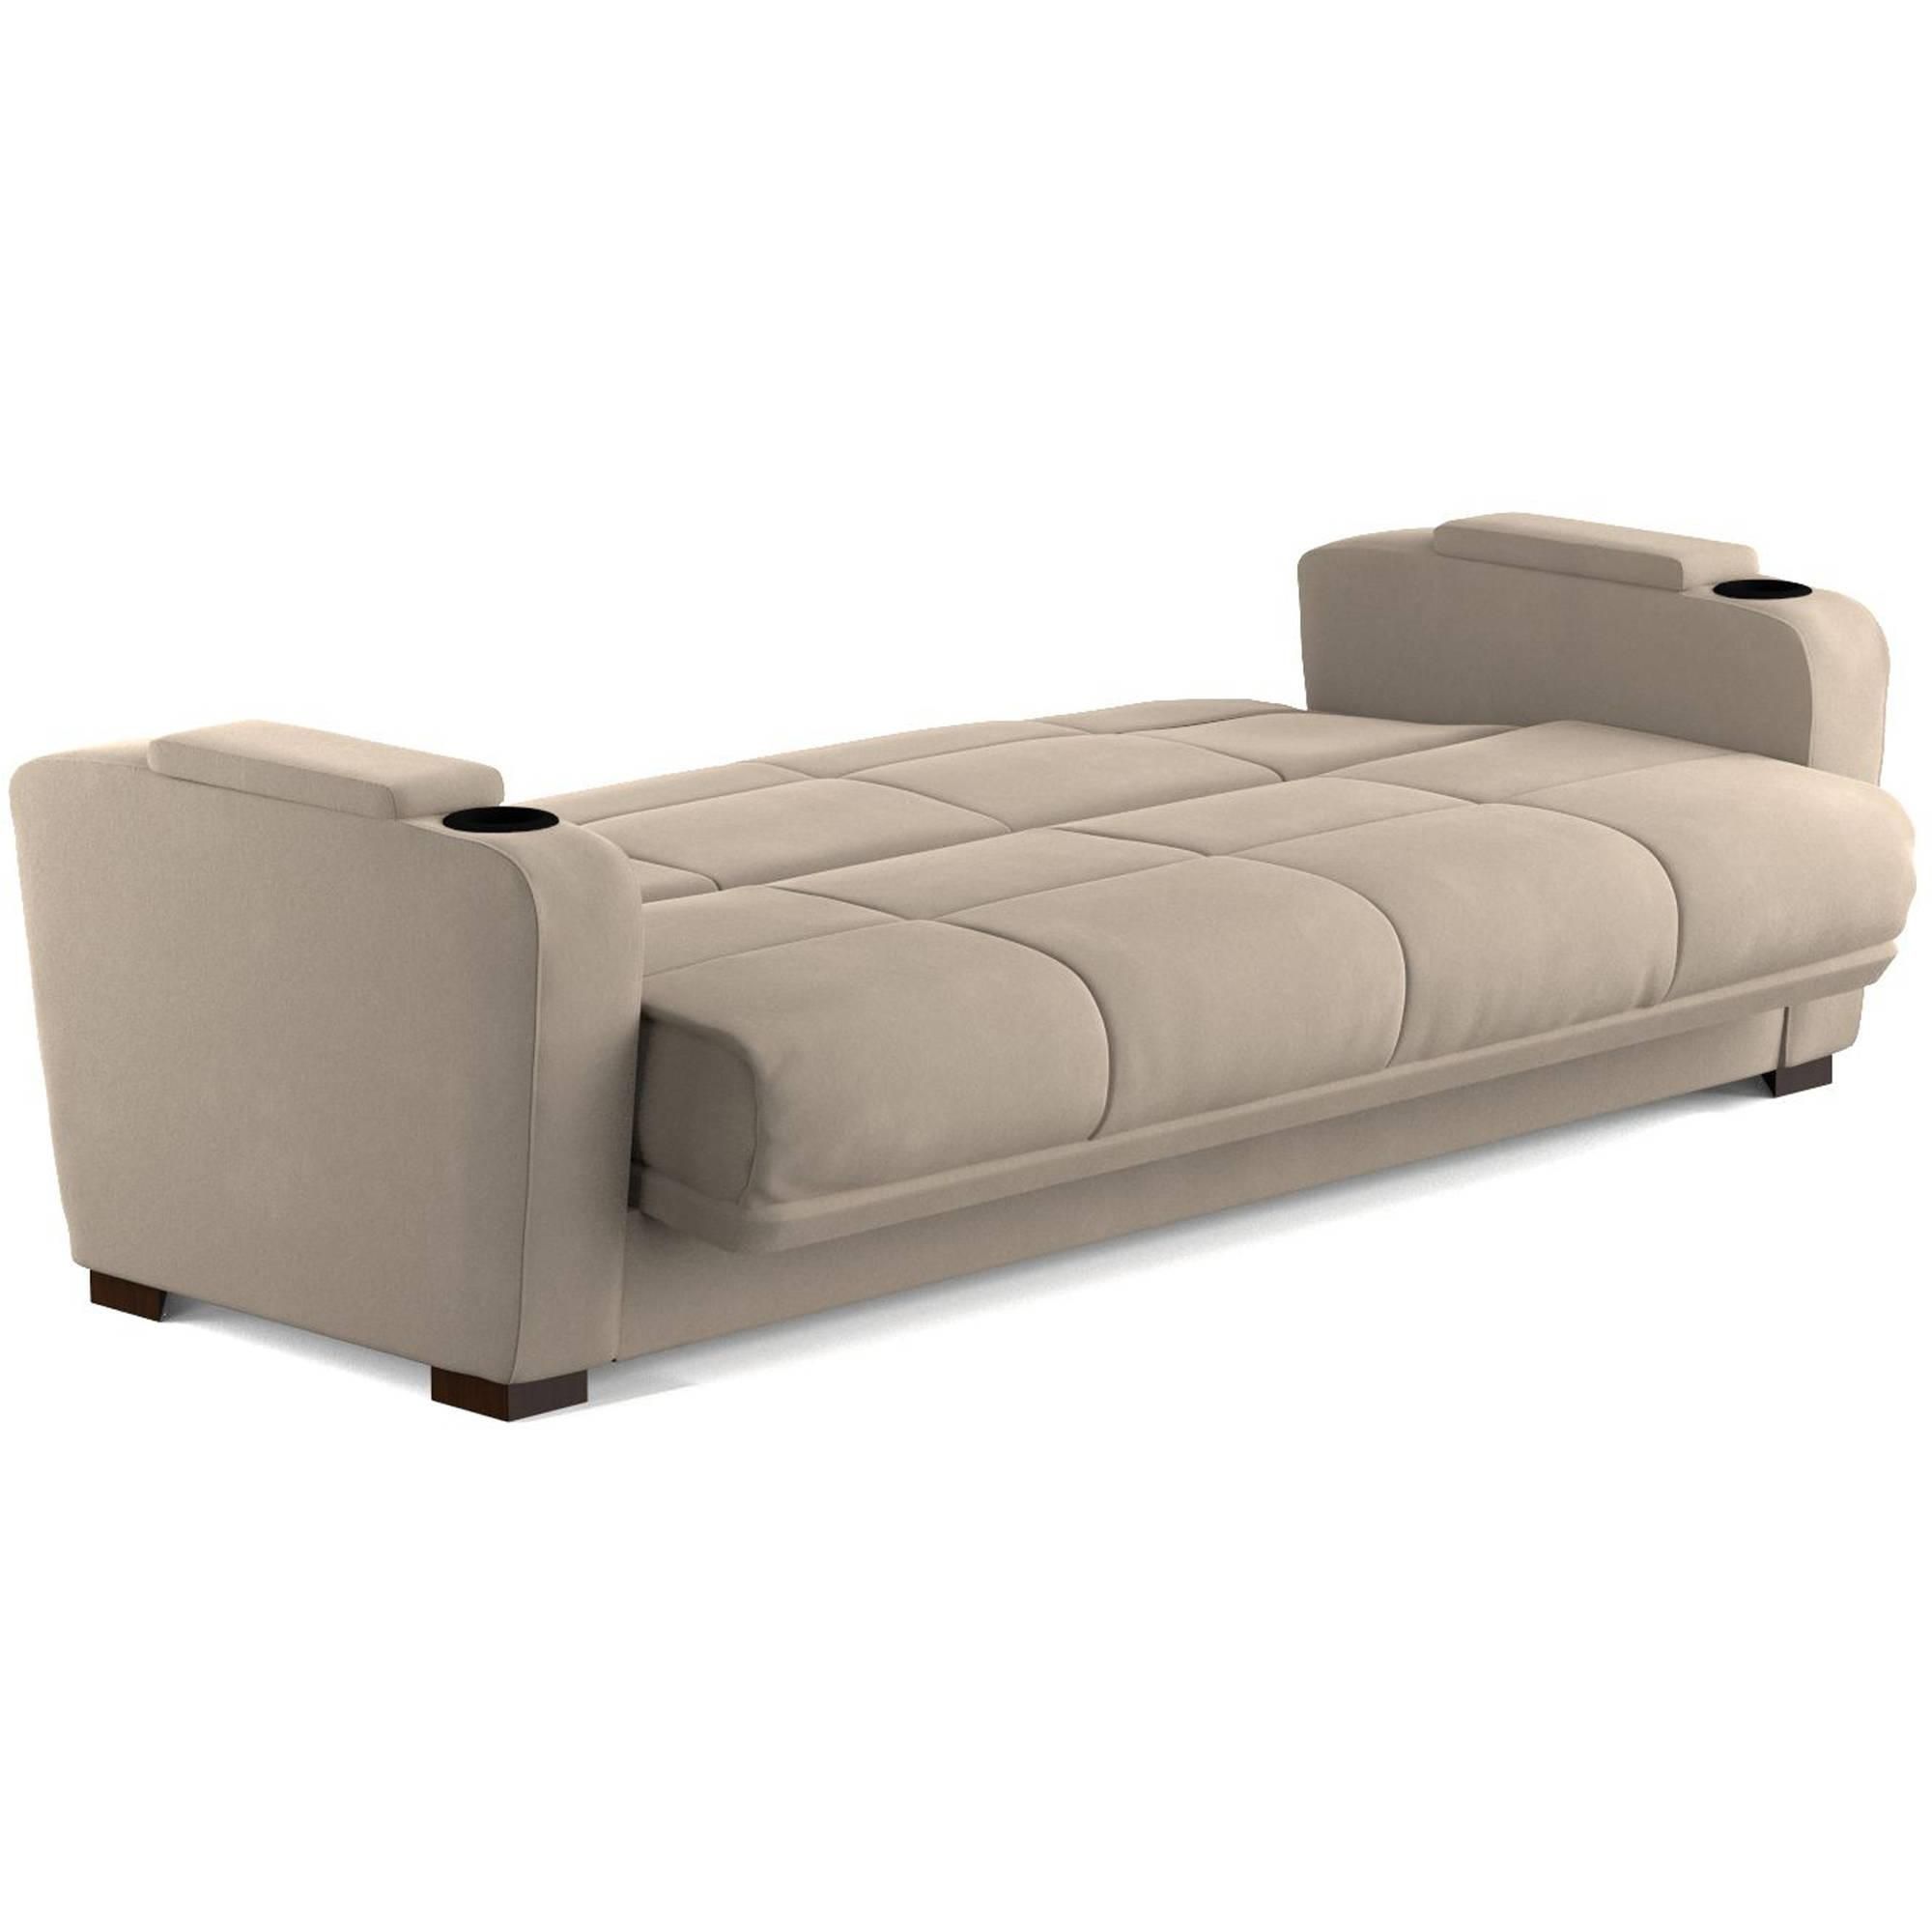 Mainstays Tyler Futon With Storage Sofa Sleeper Bed, Multiple Pertaining To Sofa Beds With Storages (View 16 of 20)